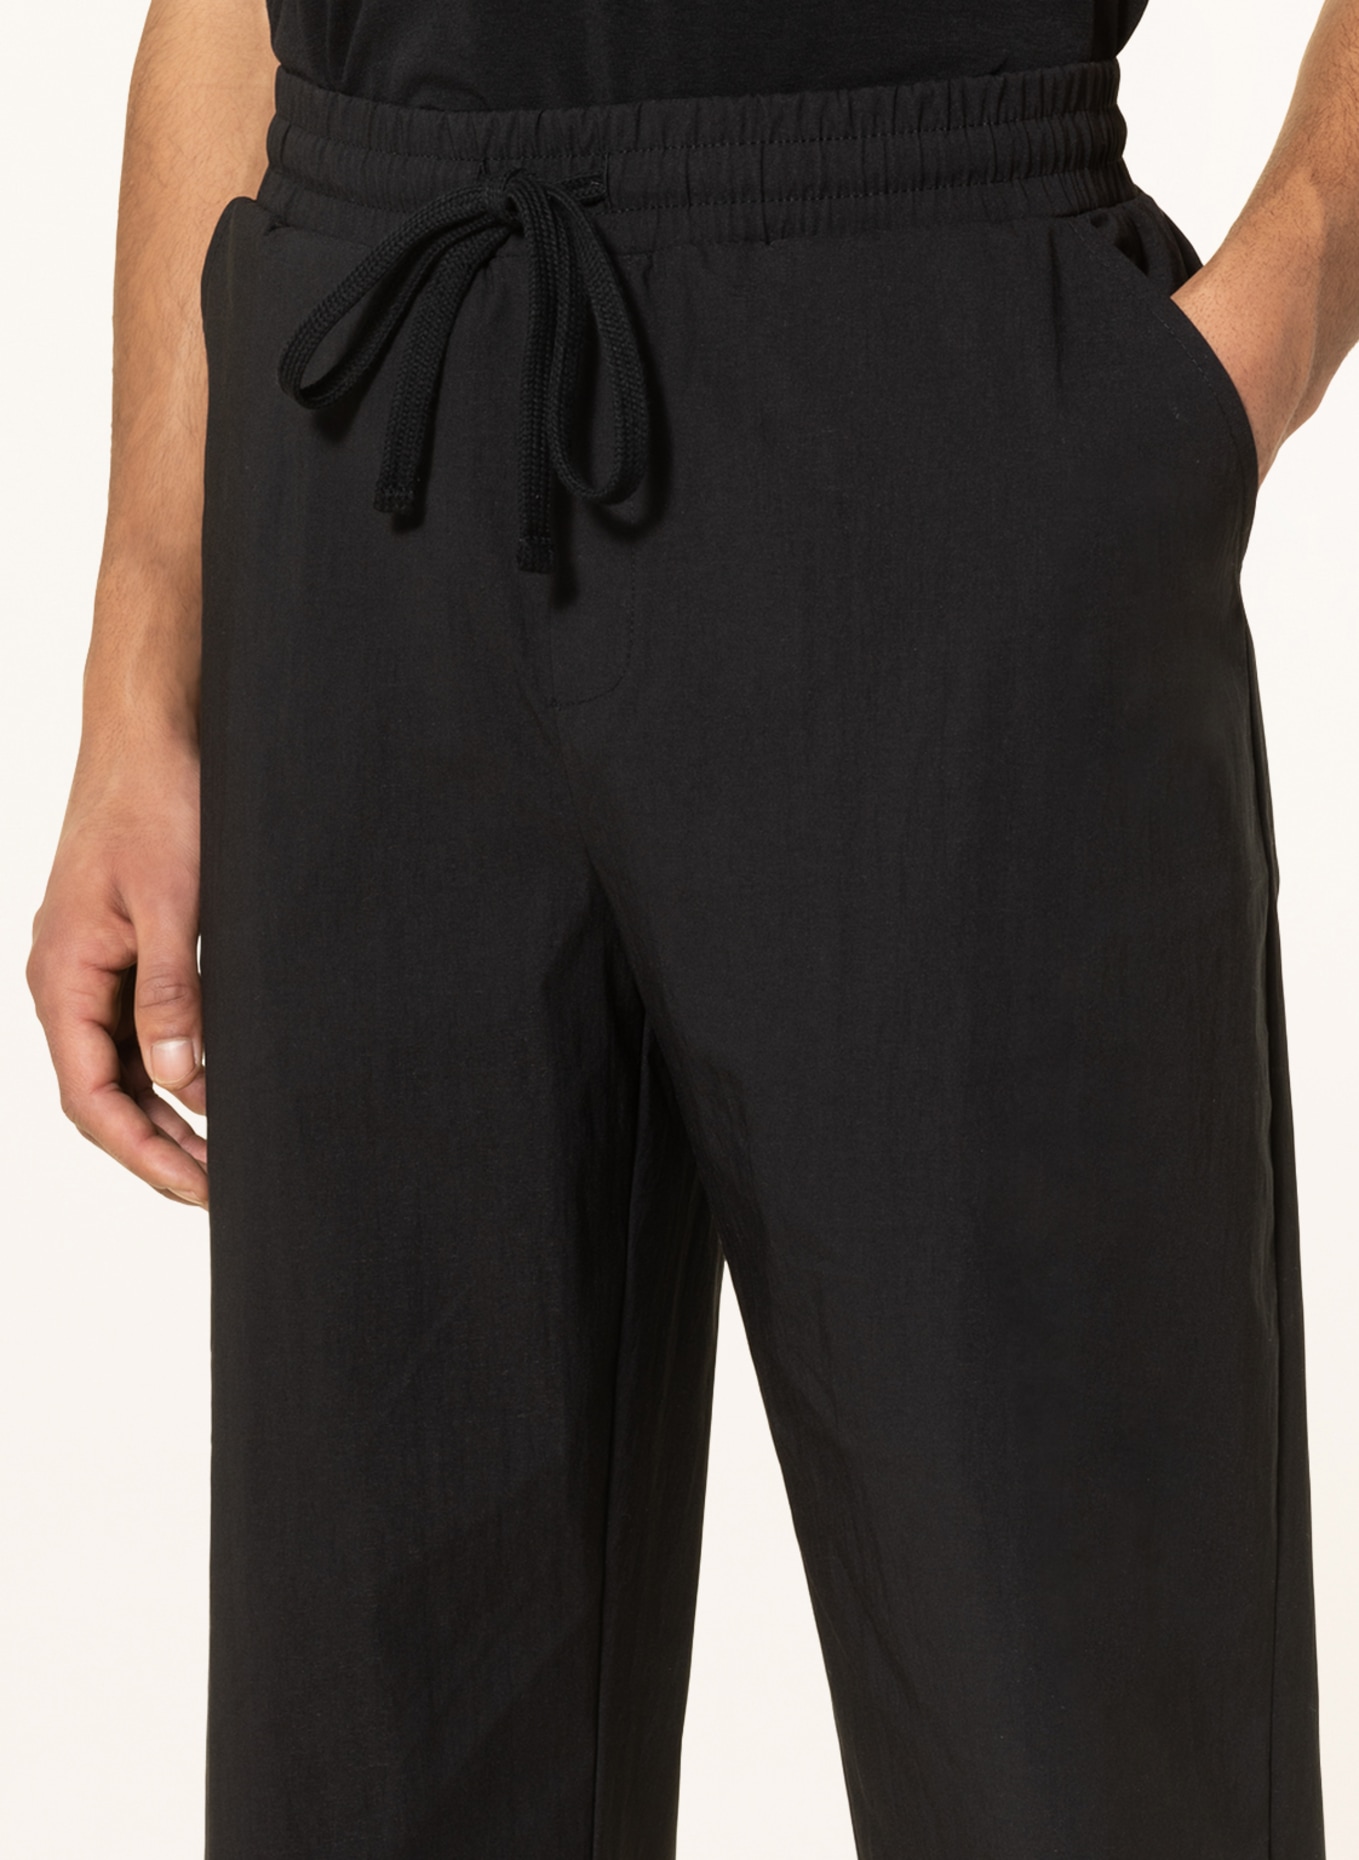 thom/krom Pants in jogger style, Color: BLACK (Image 5)